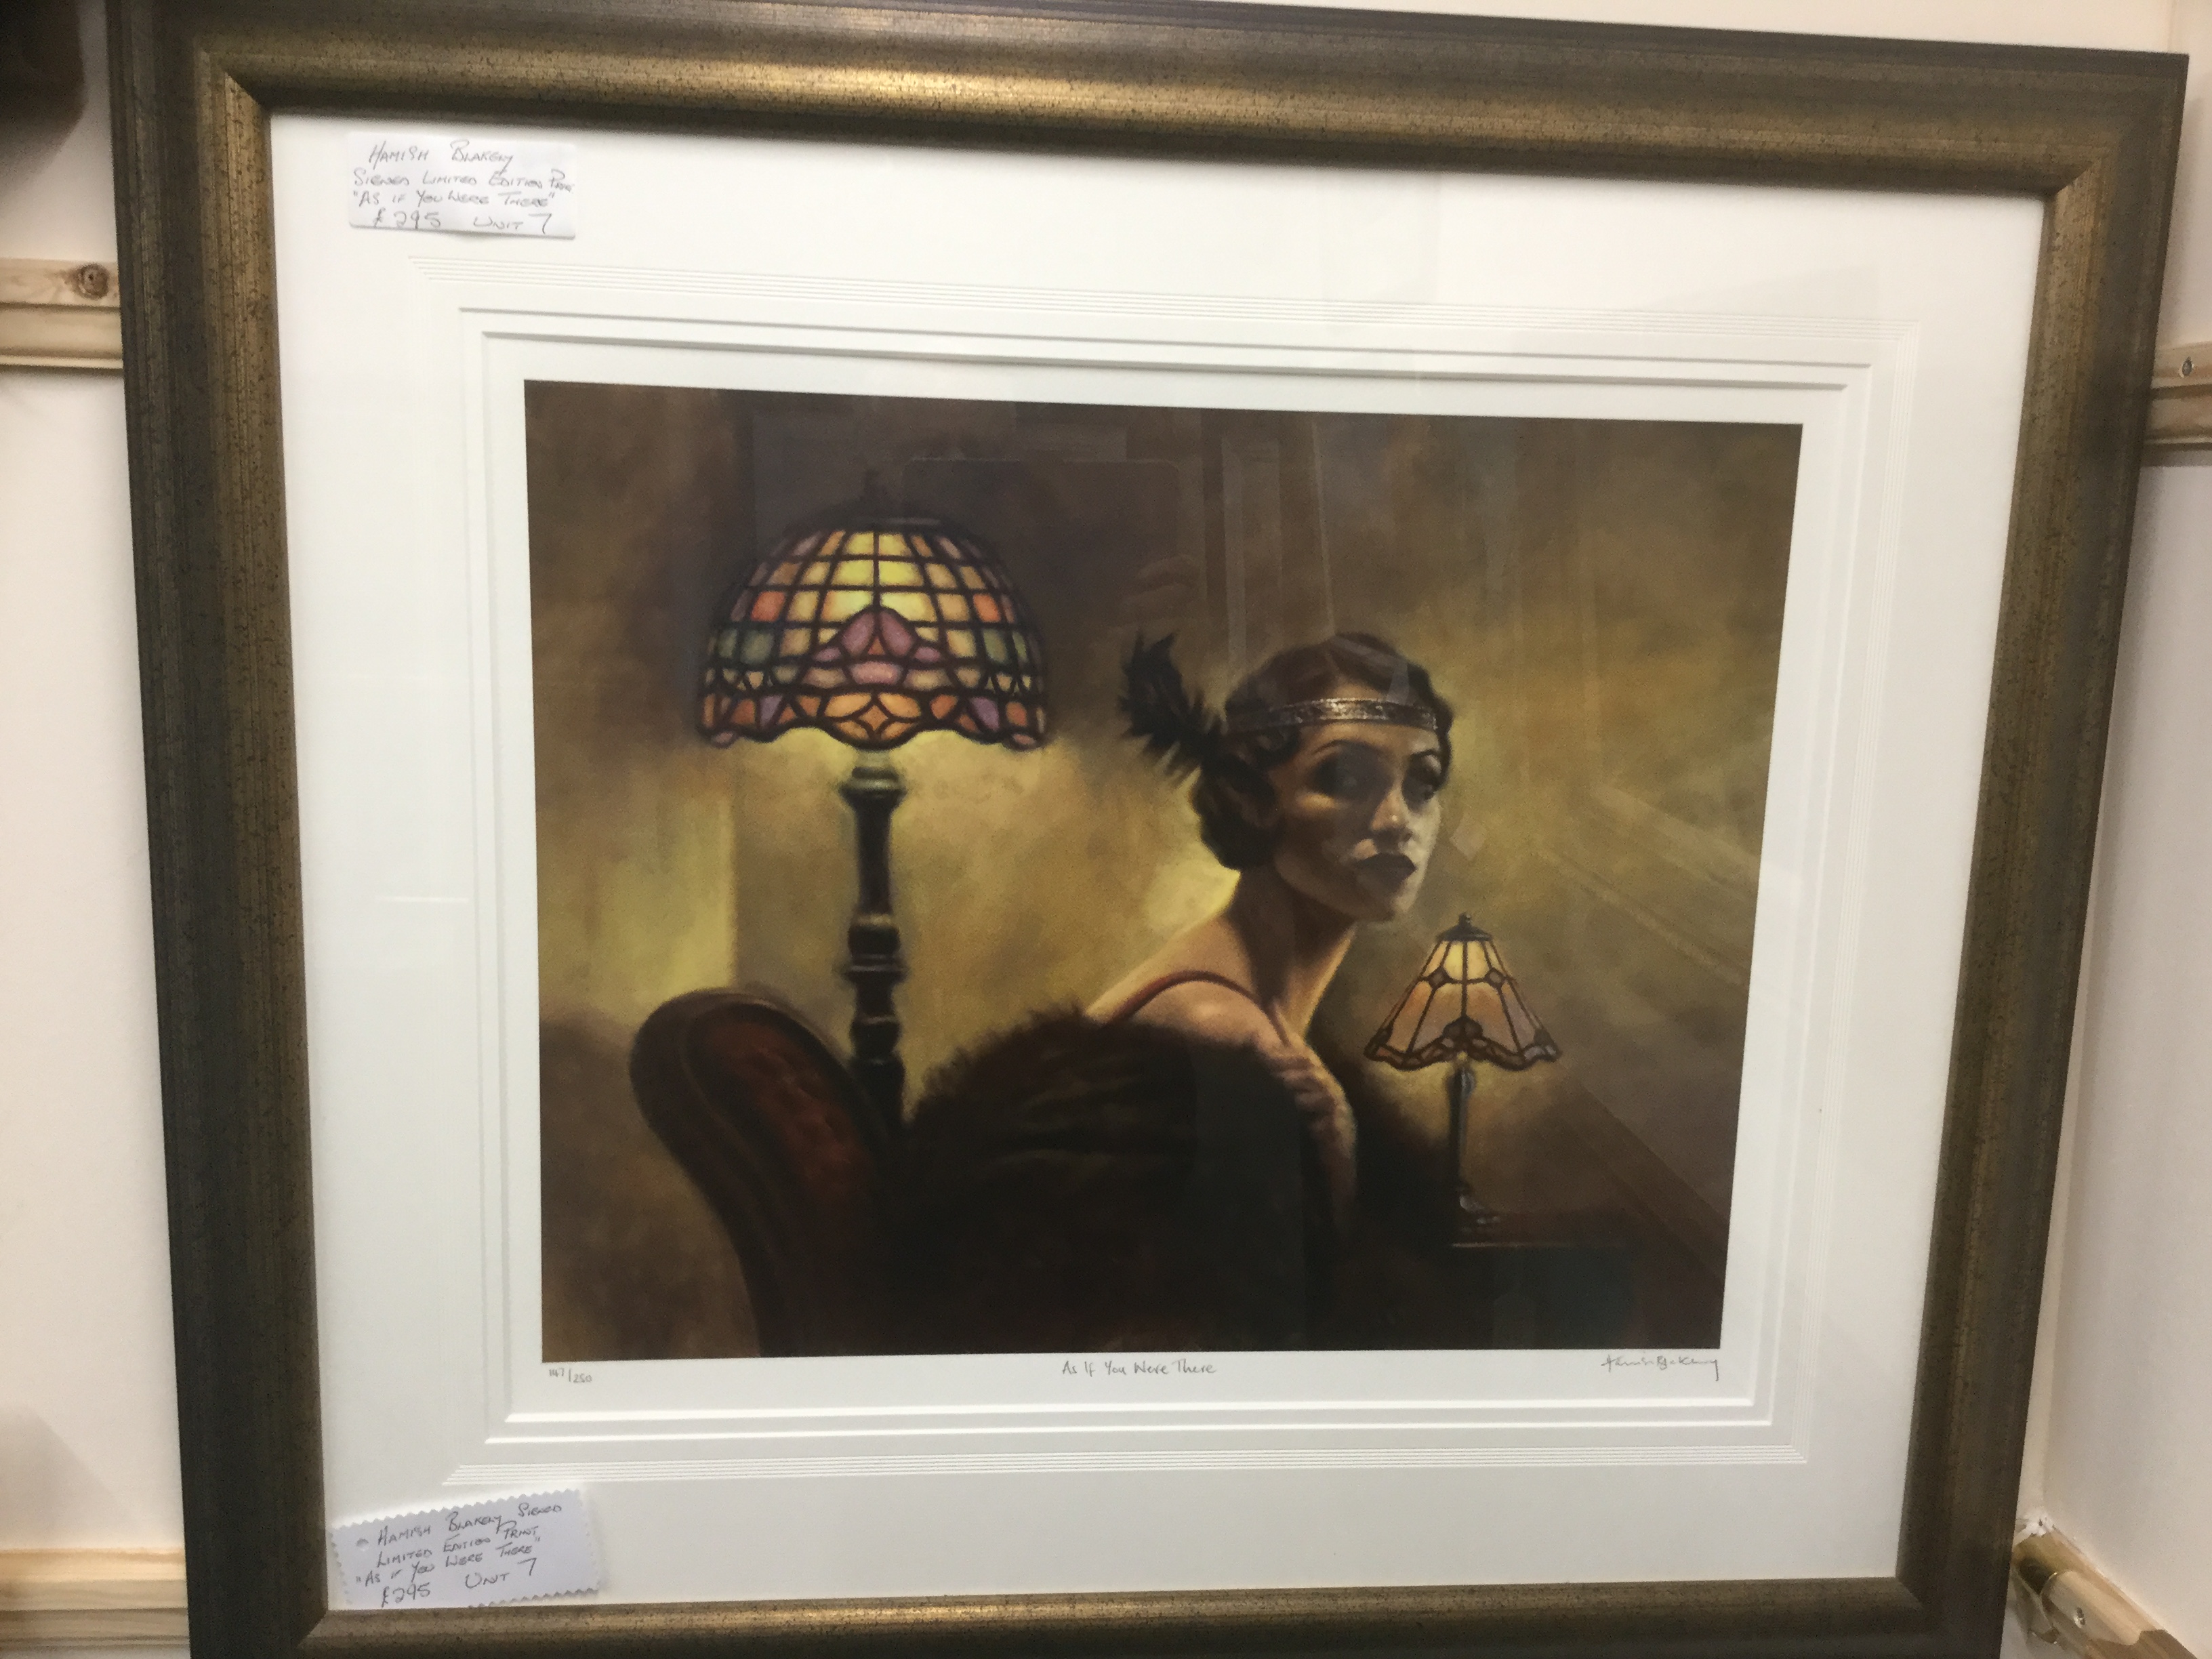 As if you were there by Hamish Blakely